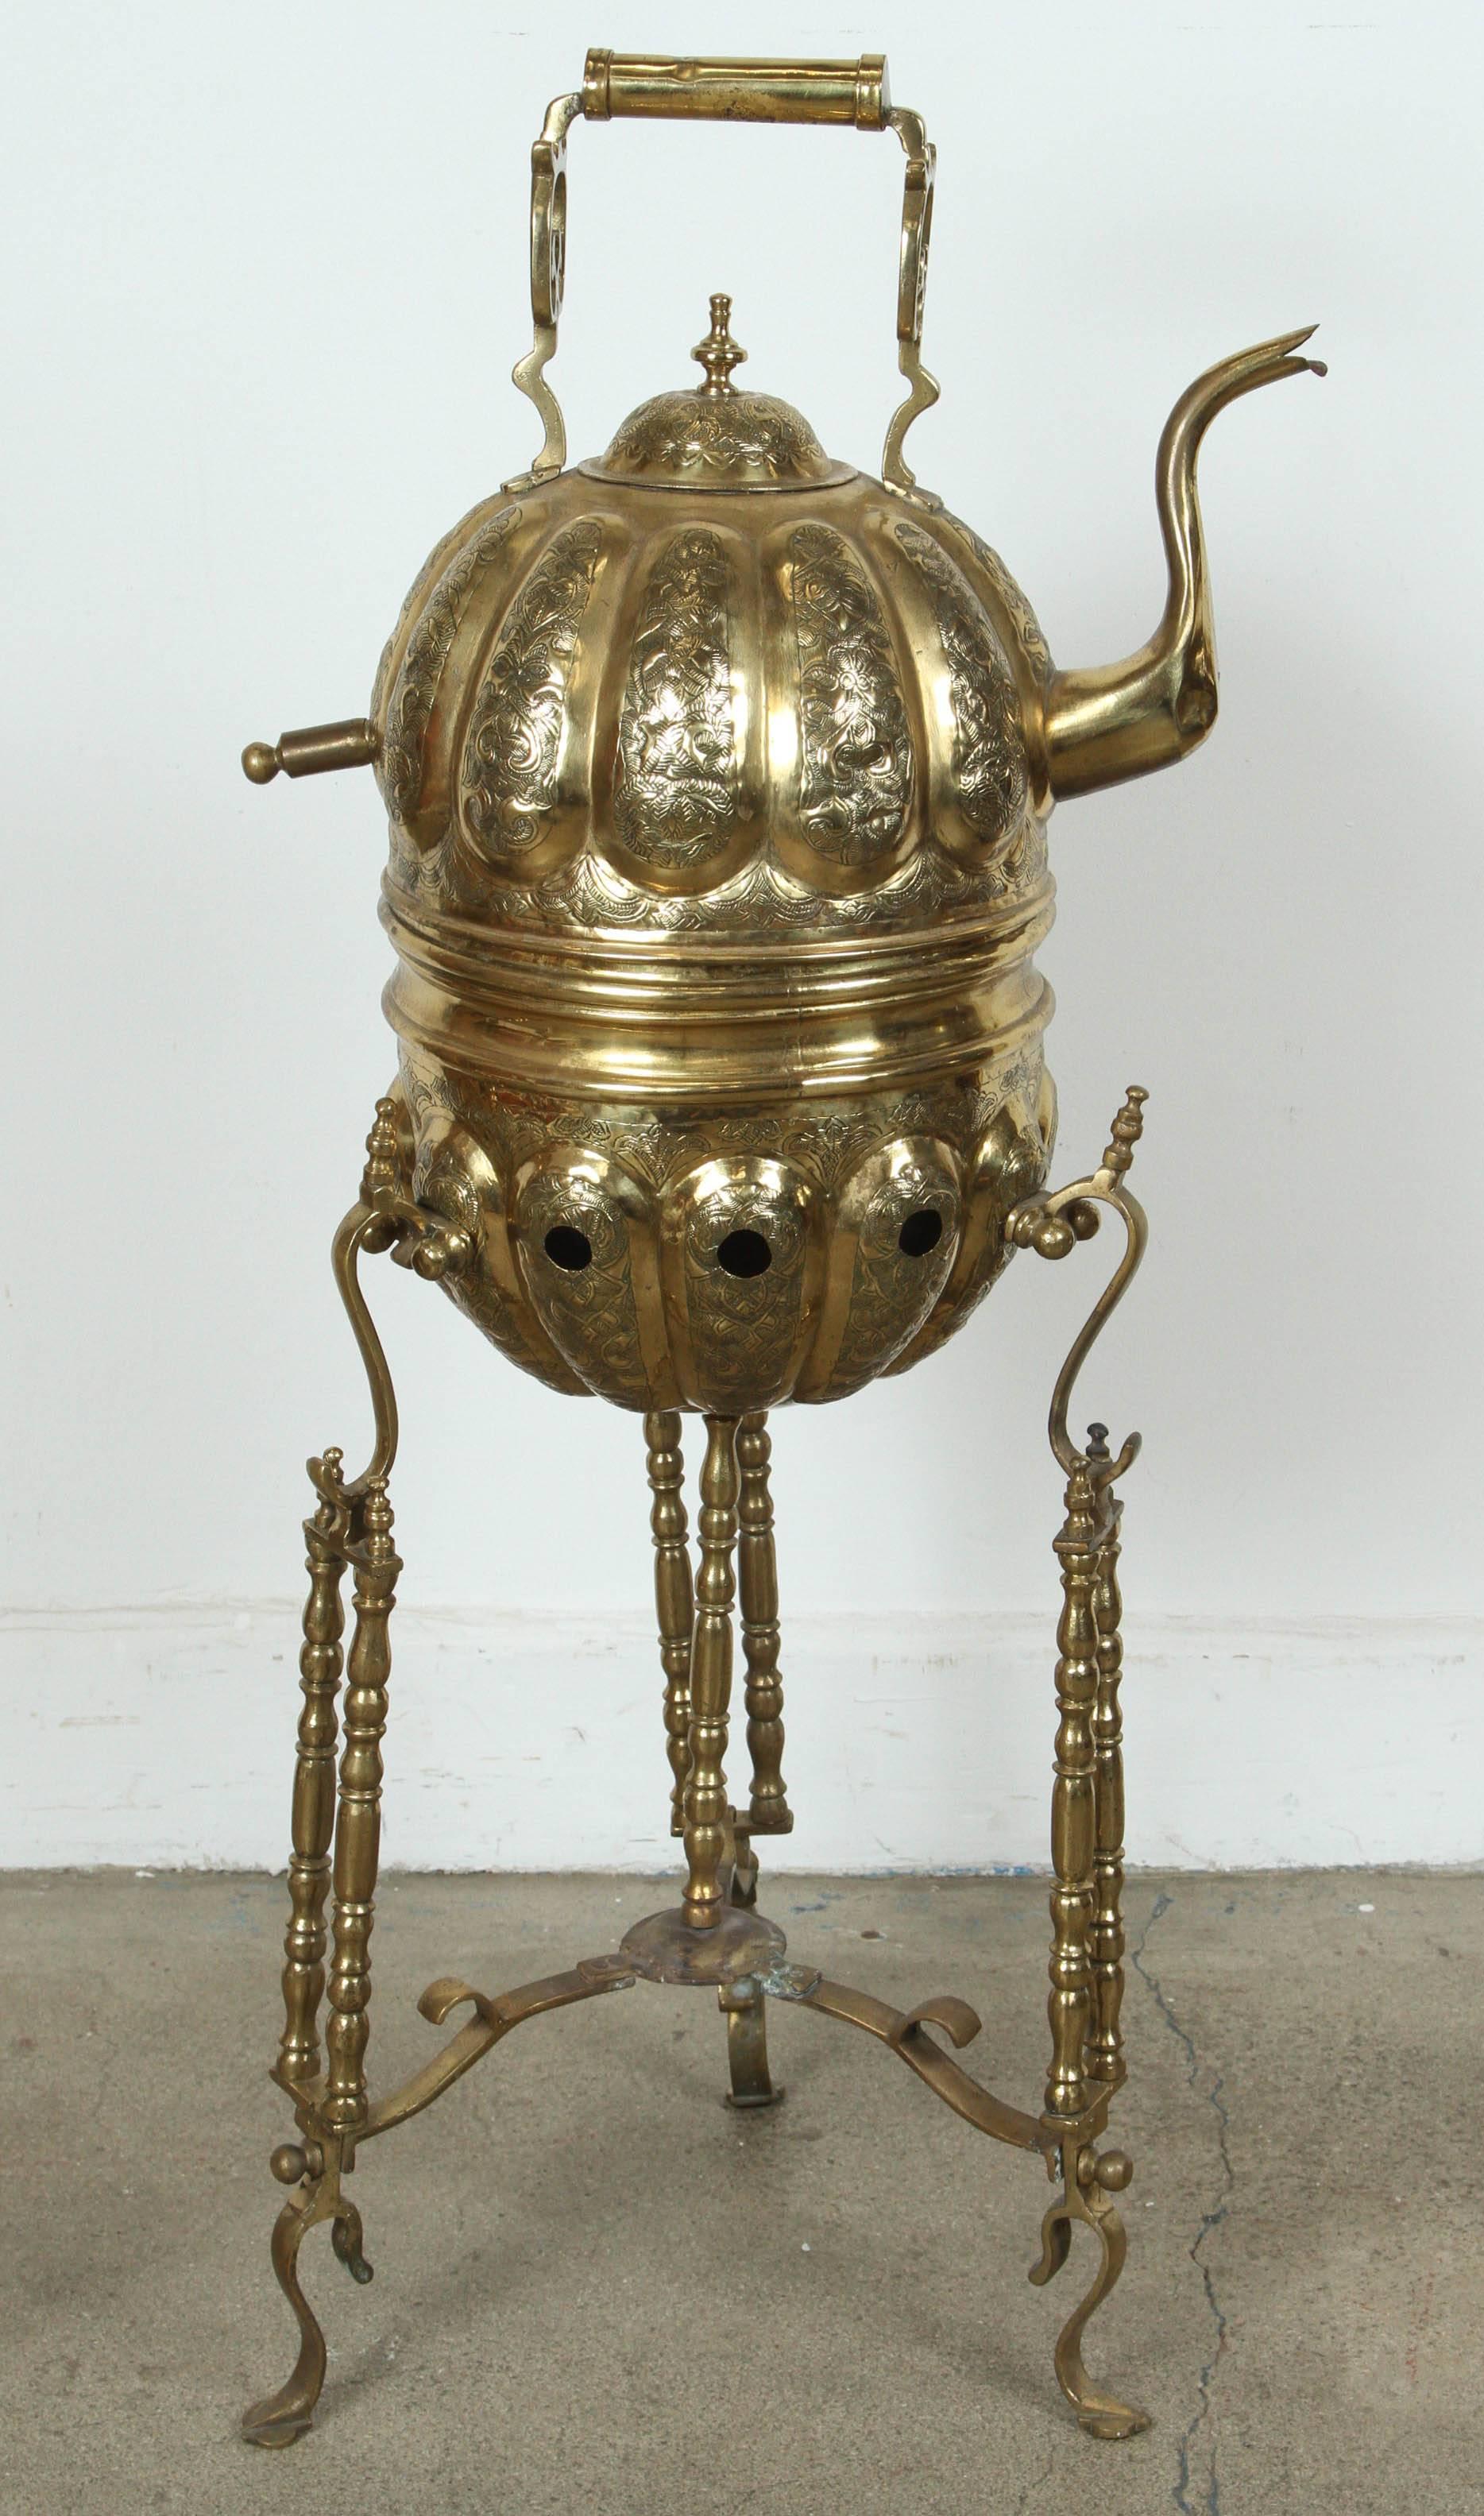 Repoussé Moroccan Brass Tea Kettle on Stand Handcrafted in Fez Morocco For Sale